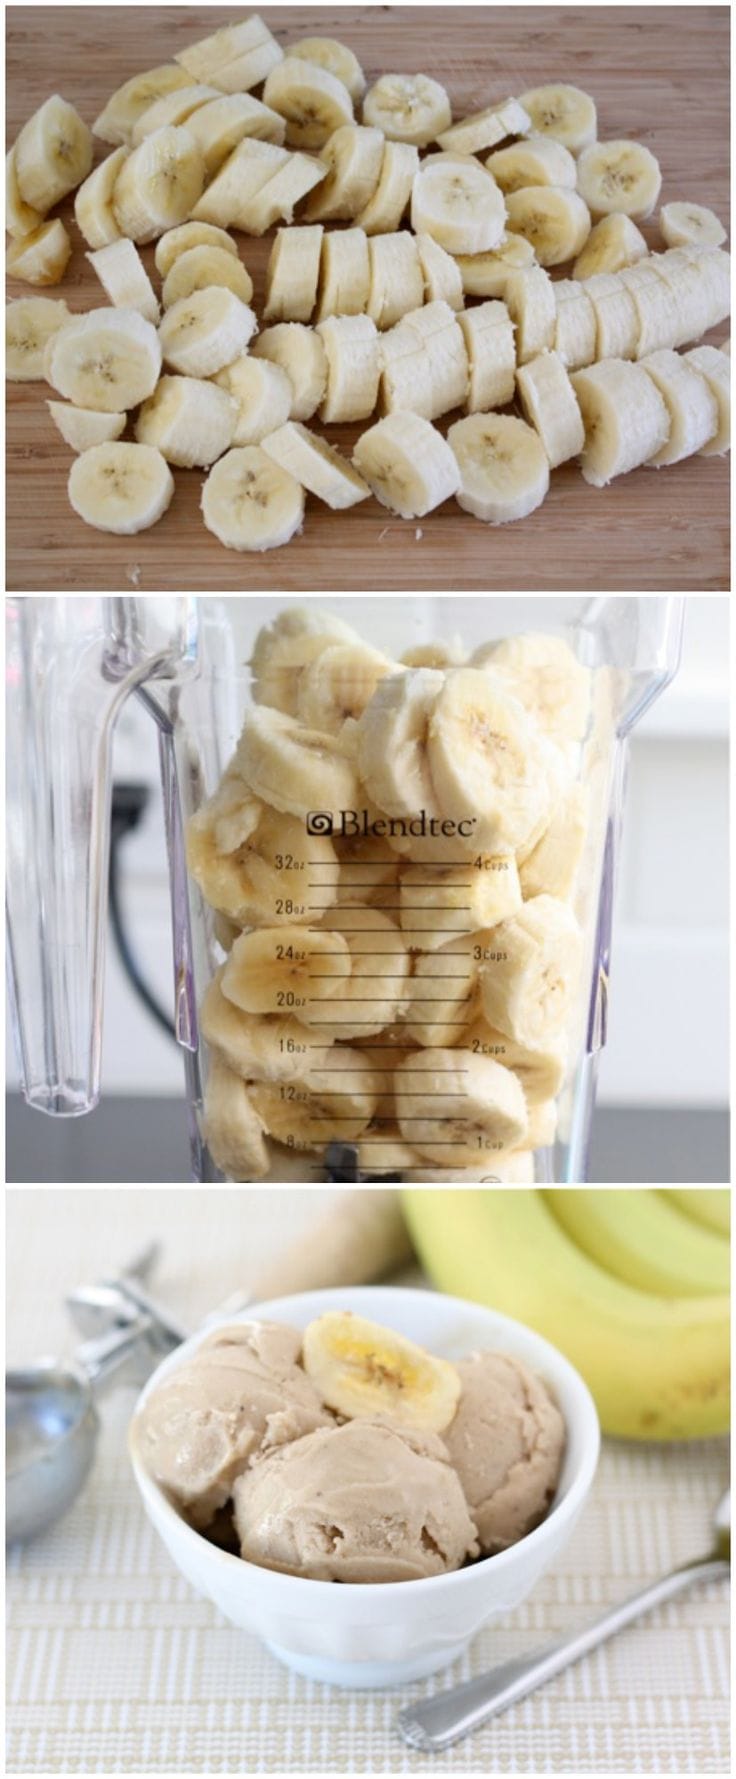 Two-Ingredient Banana Peanut Butter Ice Cream Recipe on twopeasandtheirpod.com Love this easy and healthy treat!